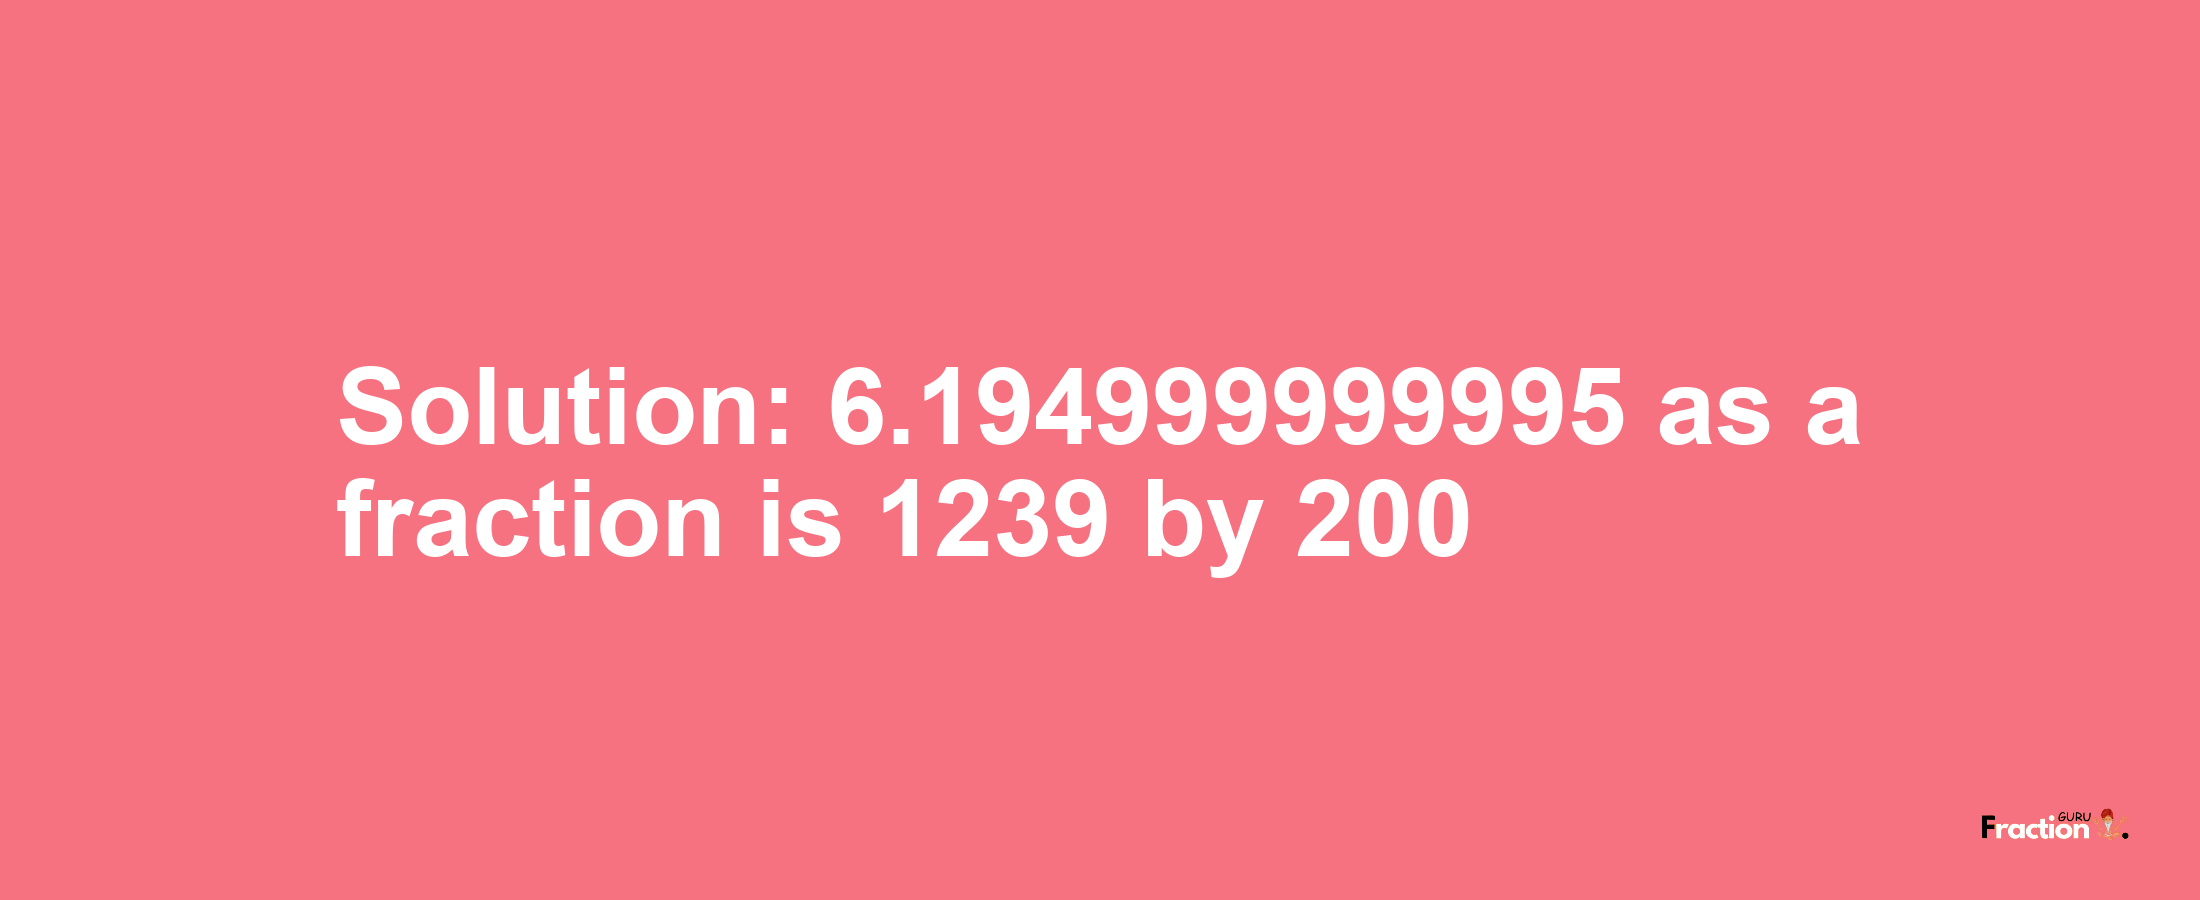 Solution:6.194999999995 as a fraction is 1239/200